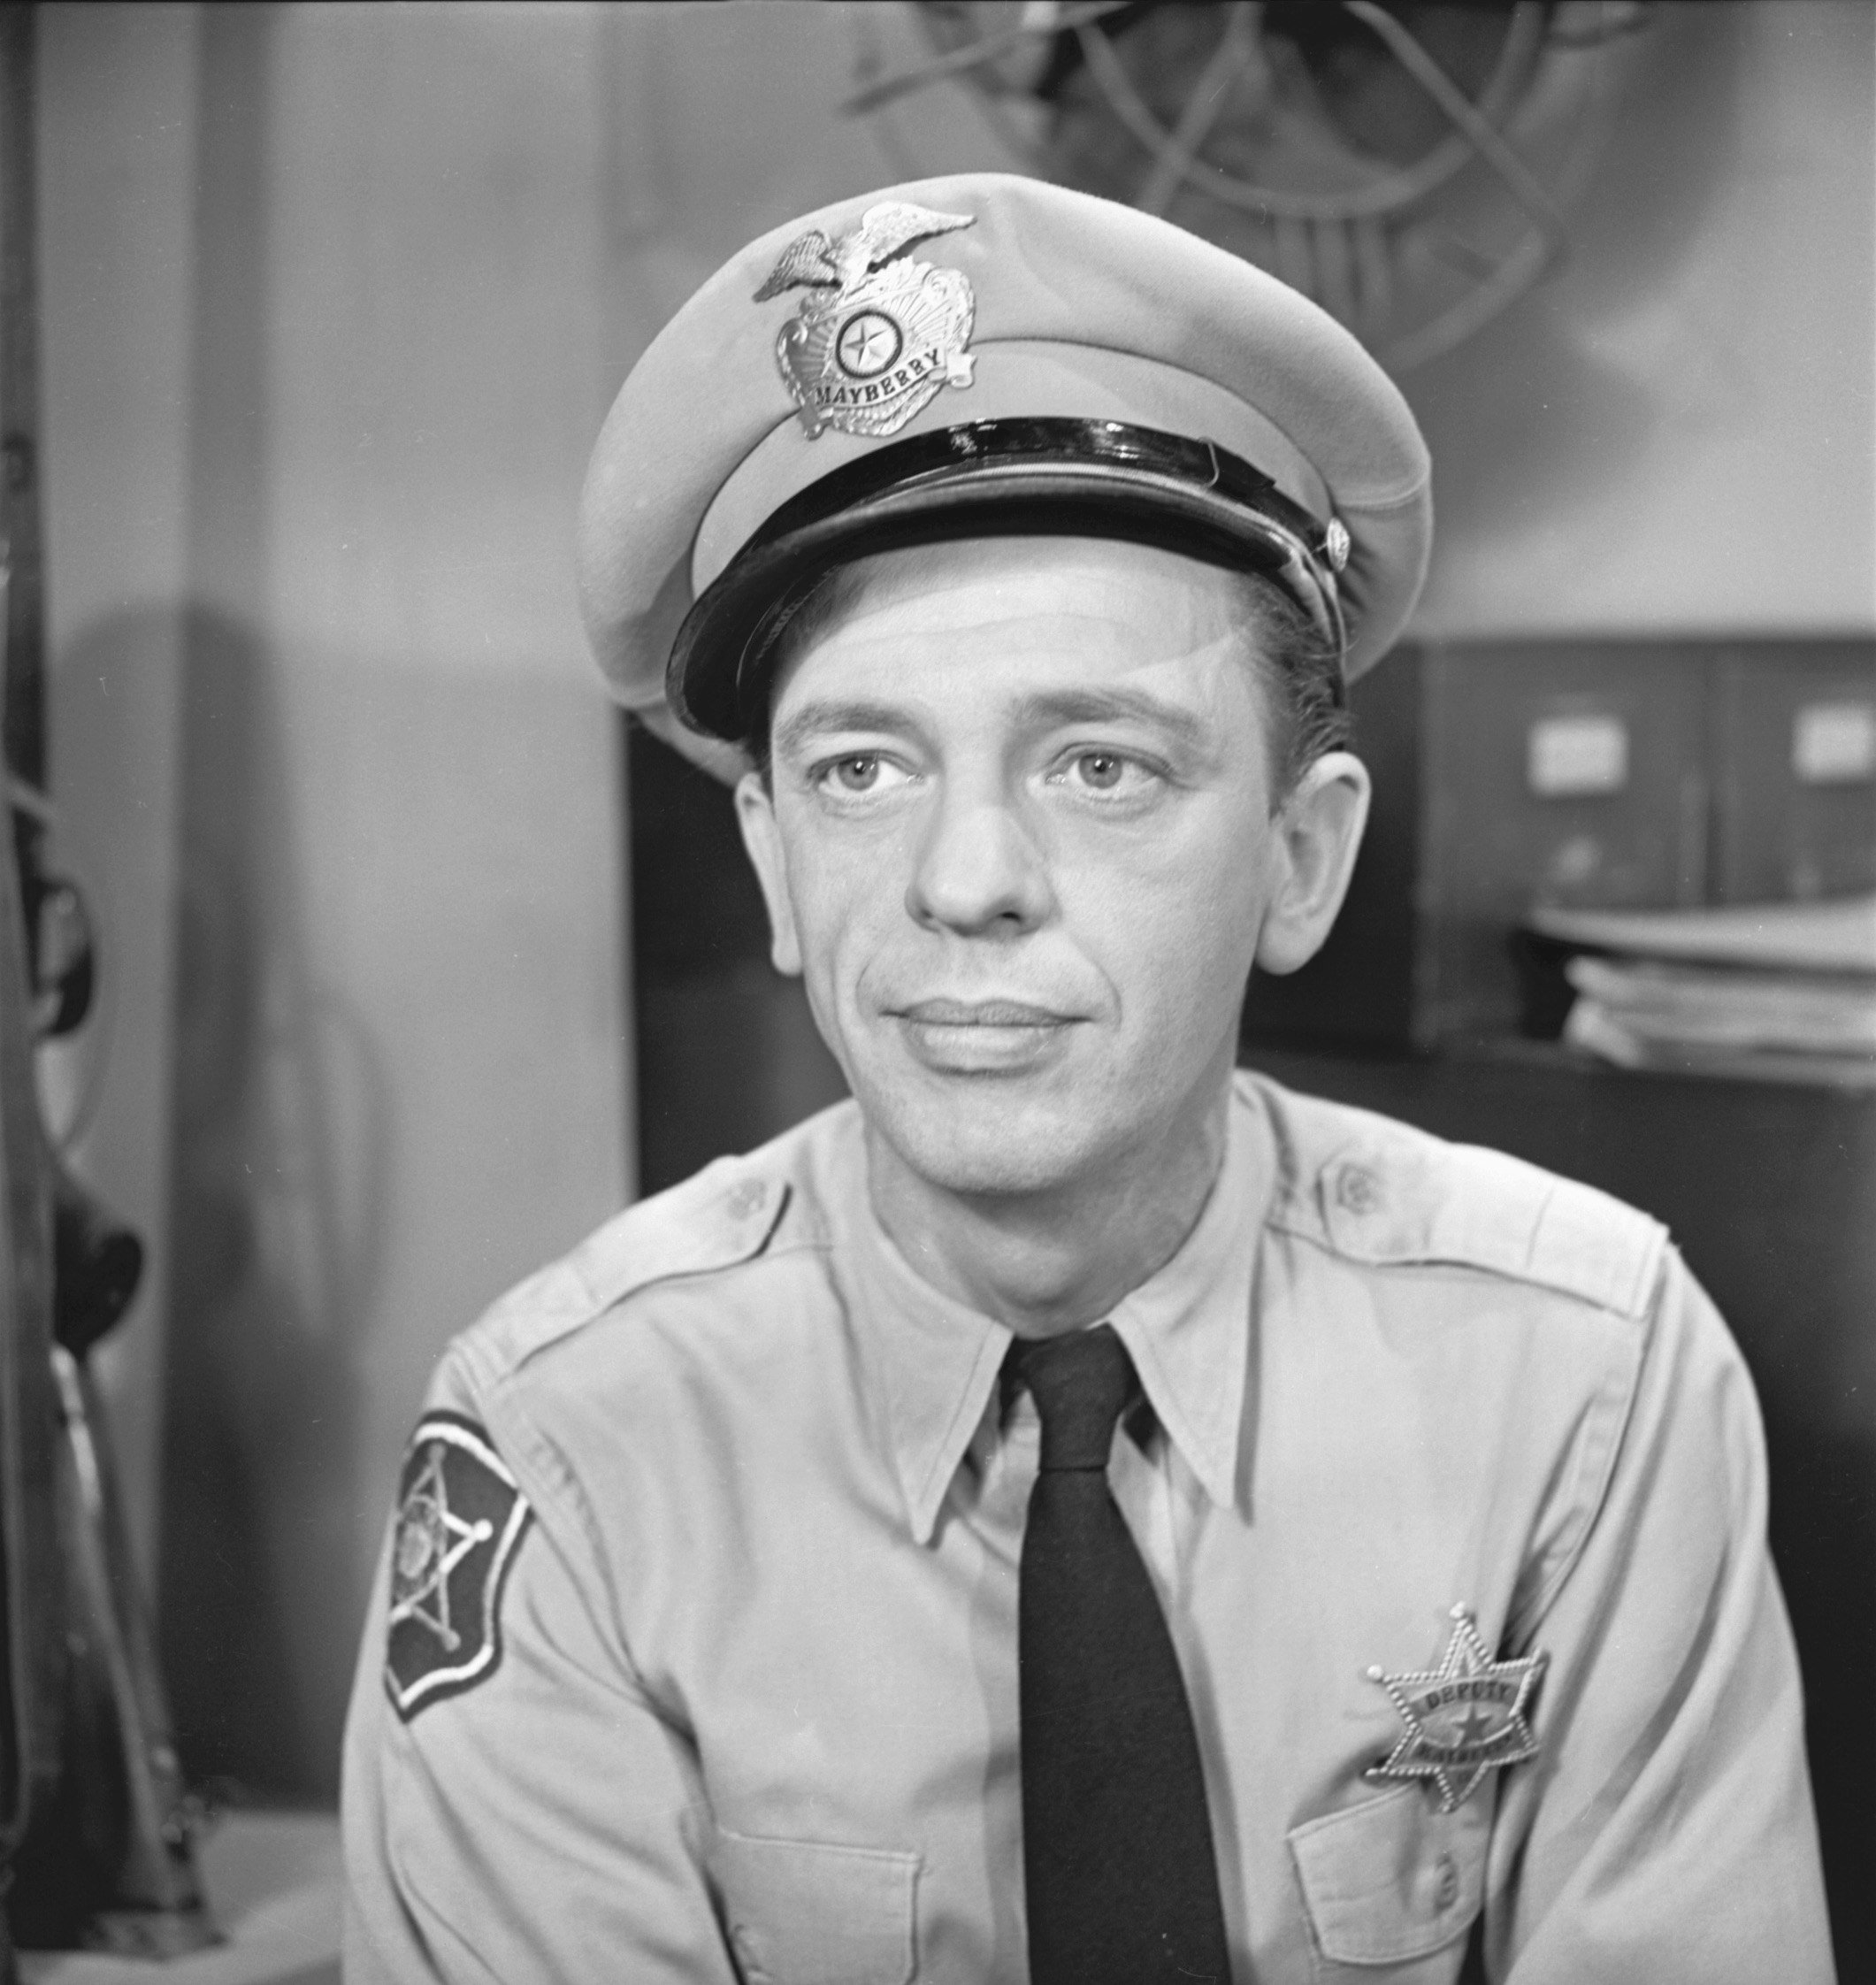 Don Knotts in uniform as 'The Andy Griffith Show's Deputy Barney Fife, 1960